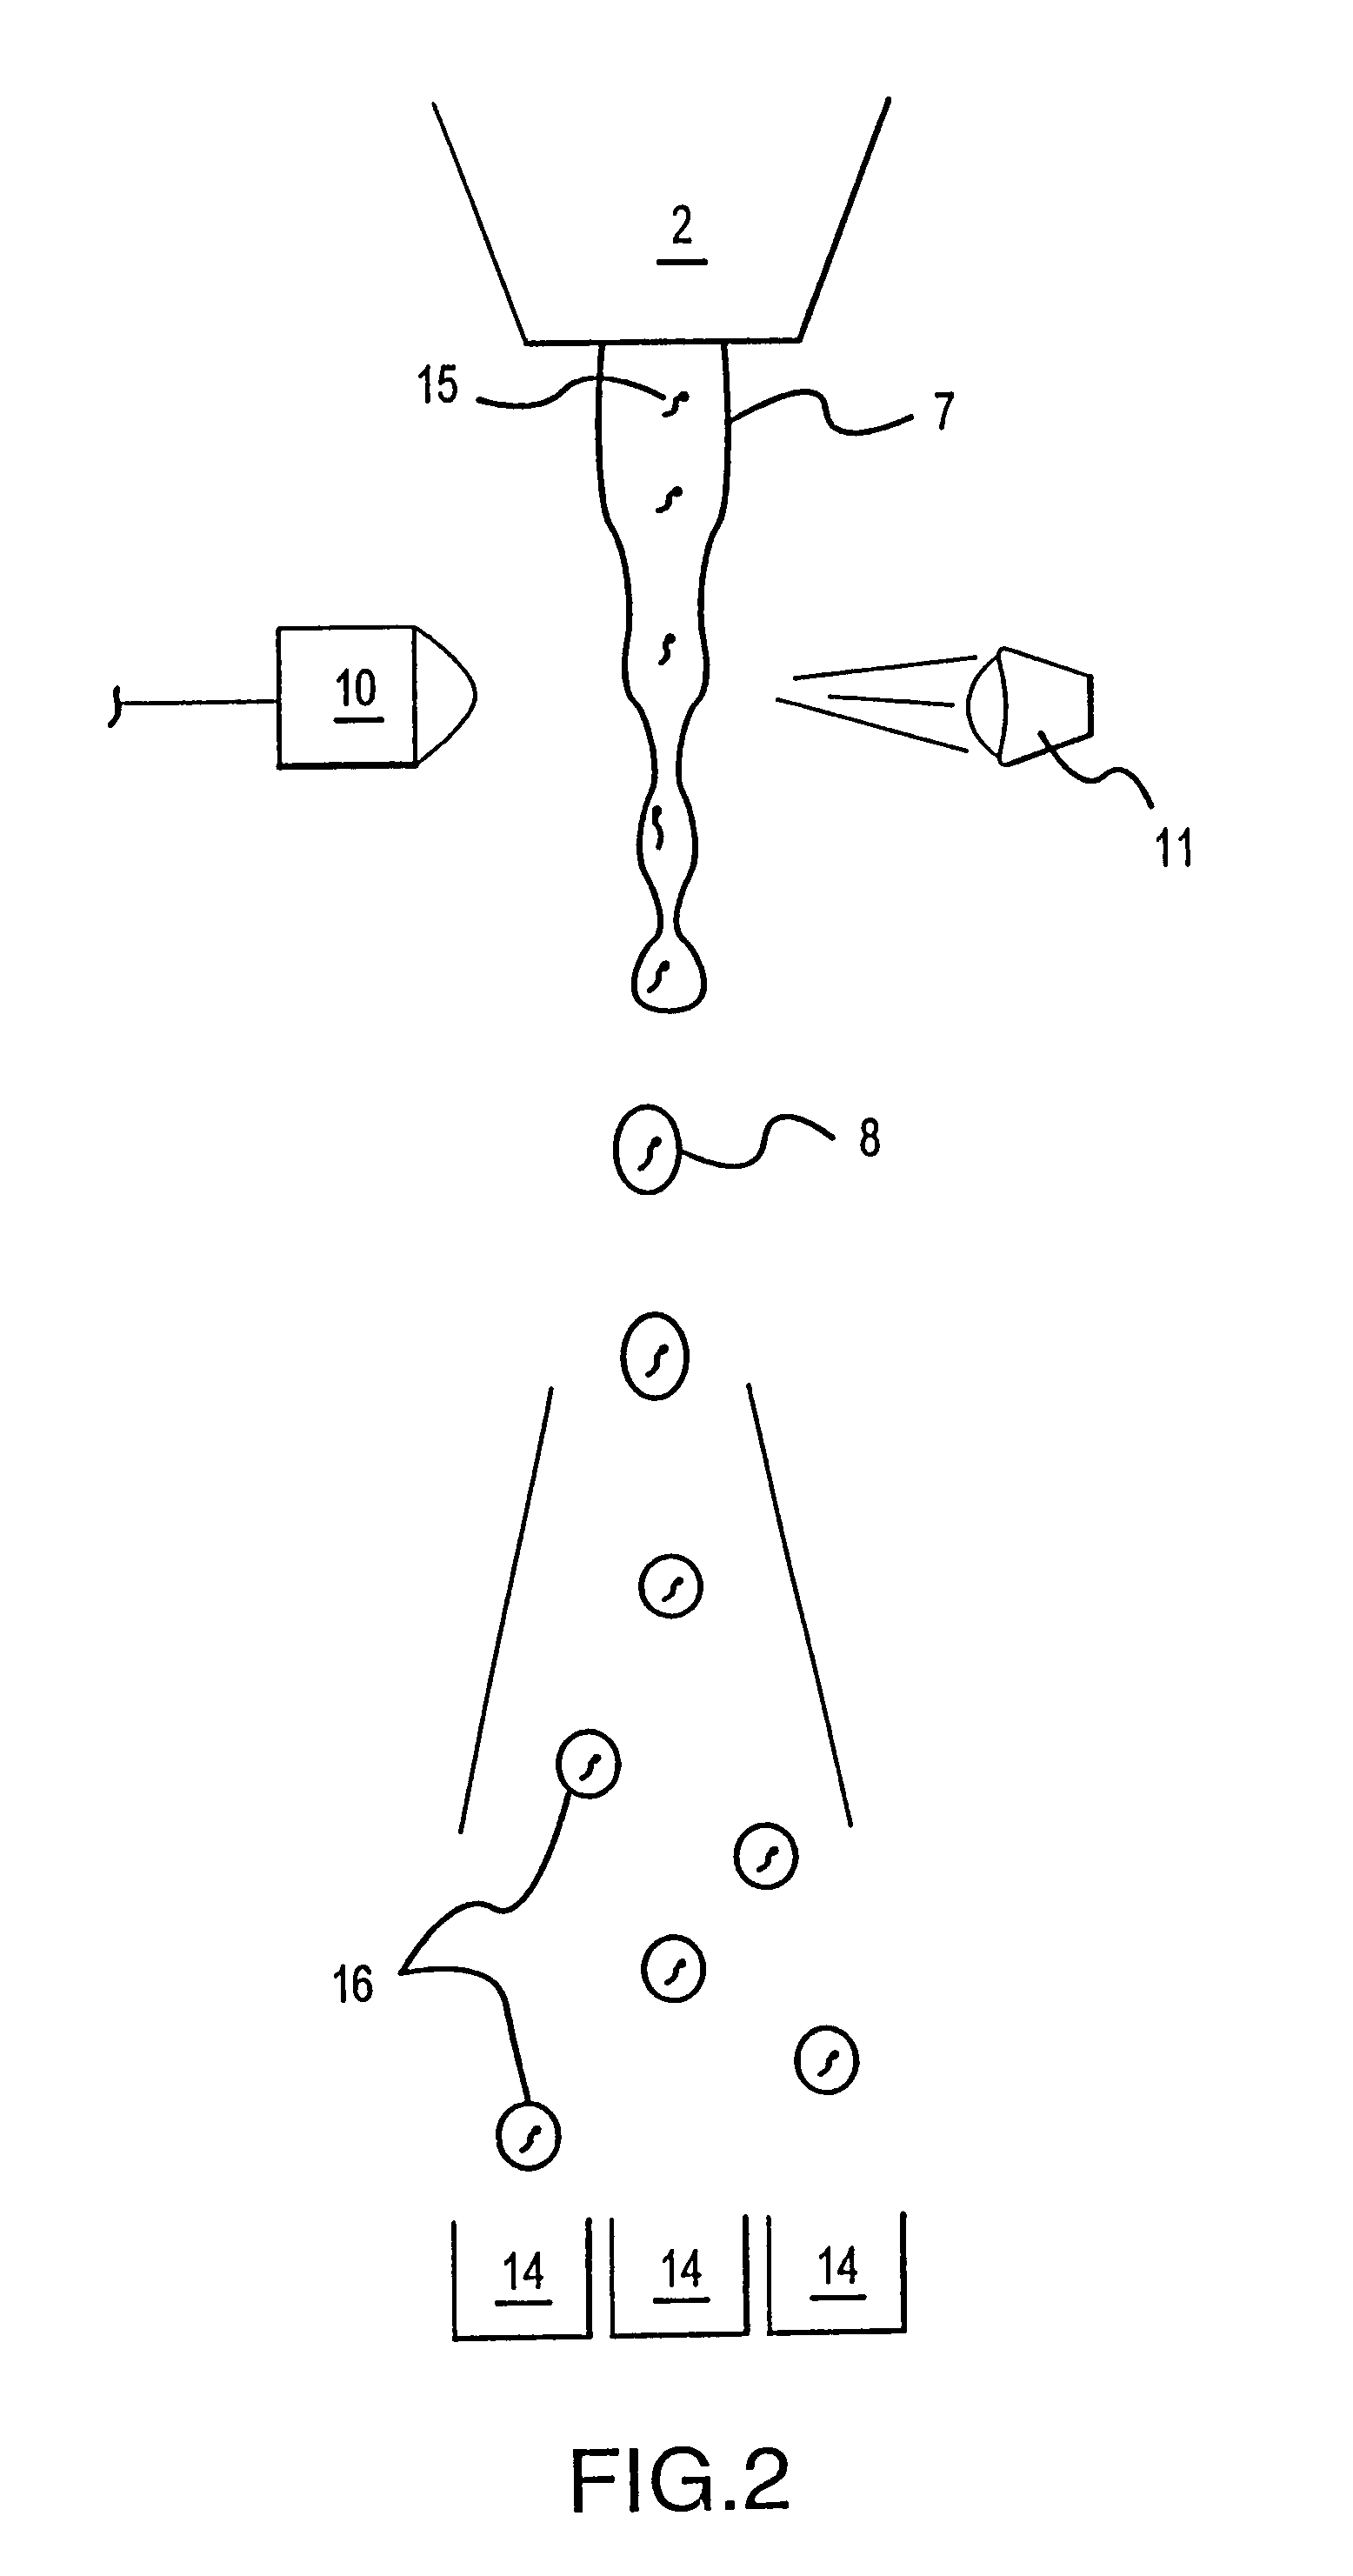 Multiple sexed embryo production system for bovine mammals